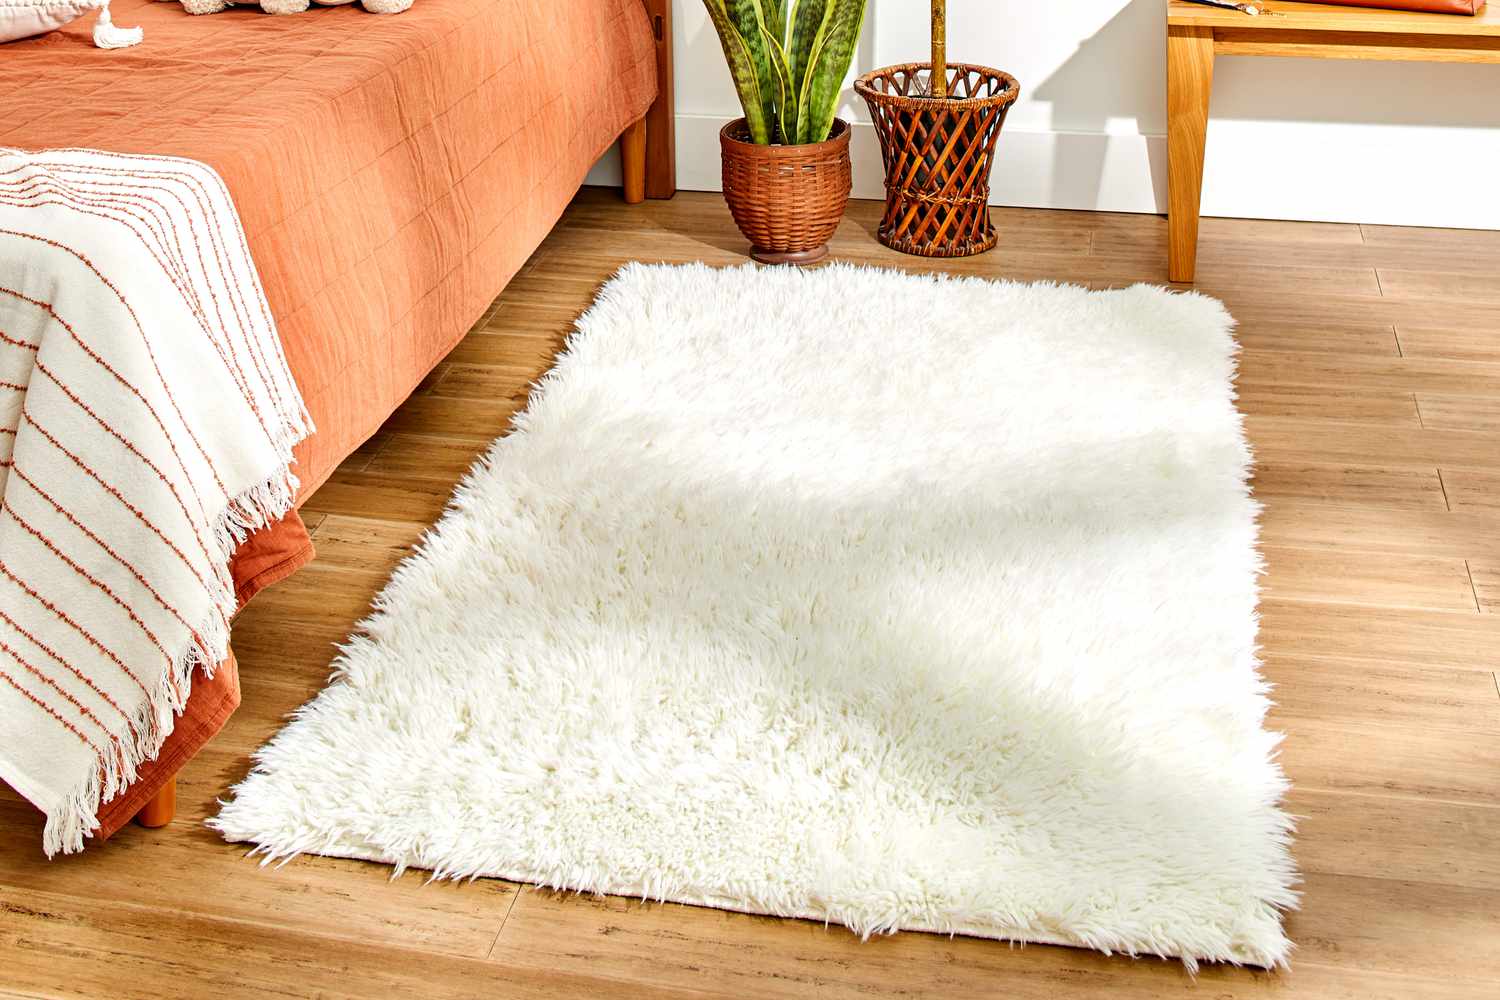 The Ruggable Shag Rug in a bedrooms setting